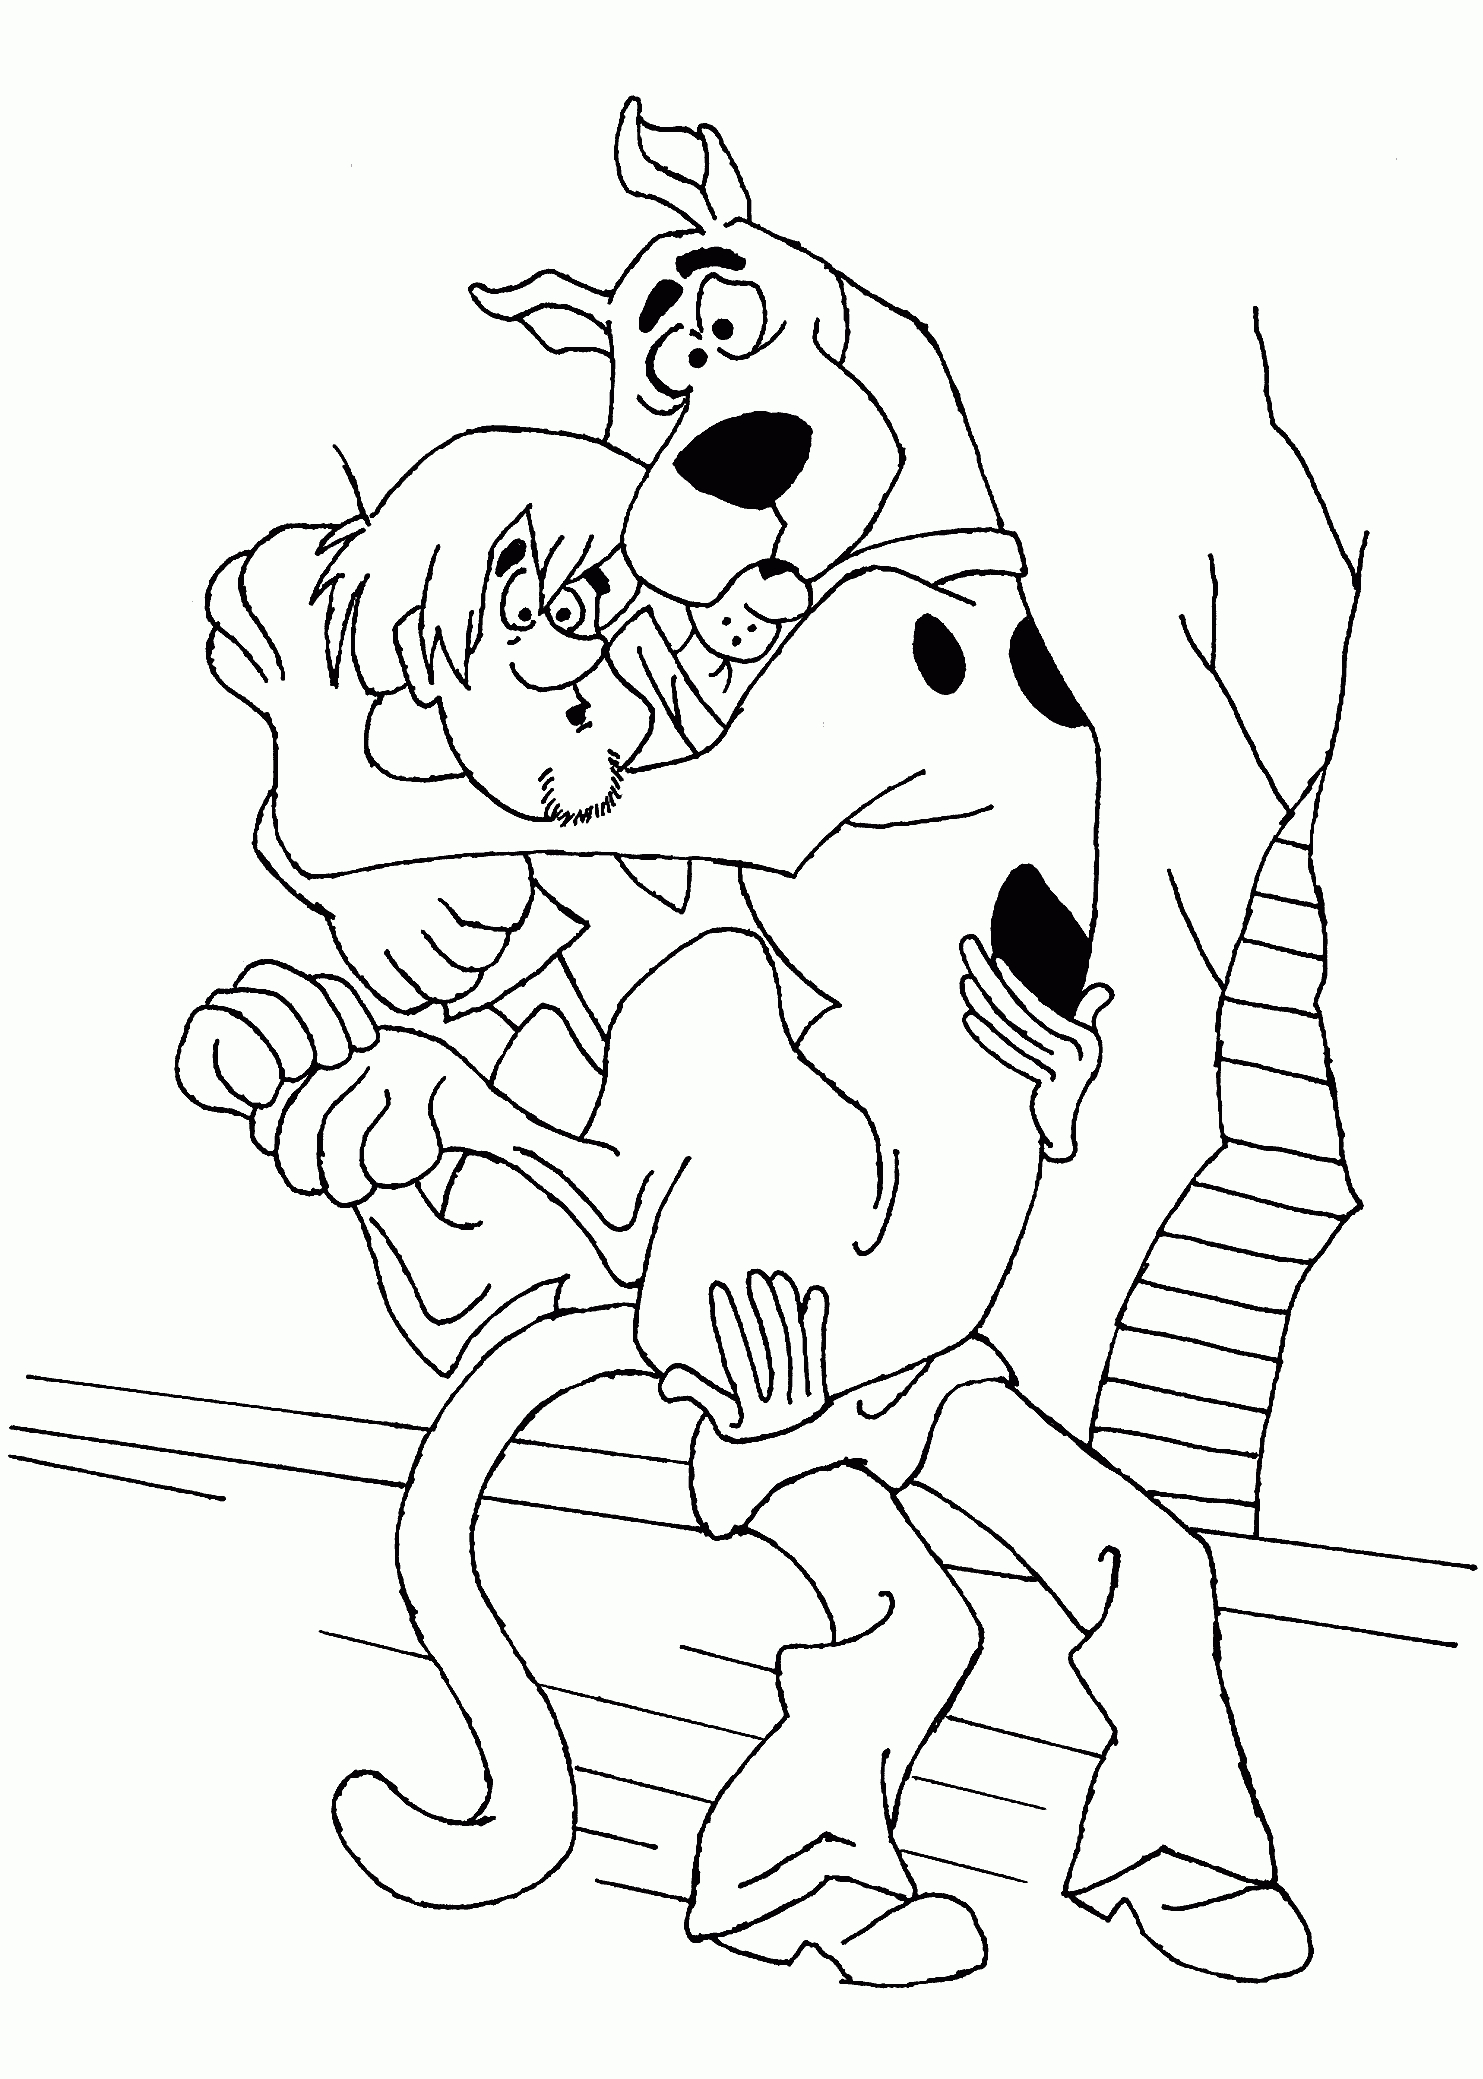 Funny Scooby Doo Coloring Pages For Kids, Printable Free | Scooby - Free Printable Coloring Pages Scooby Doo